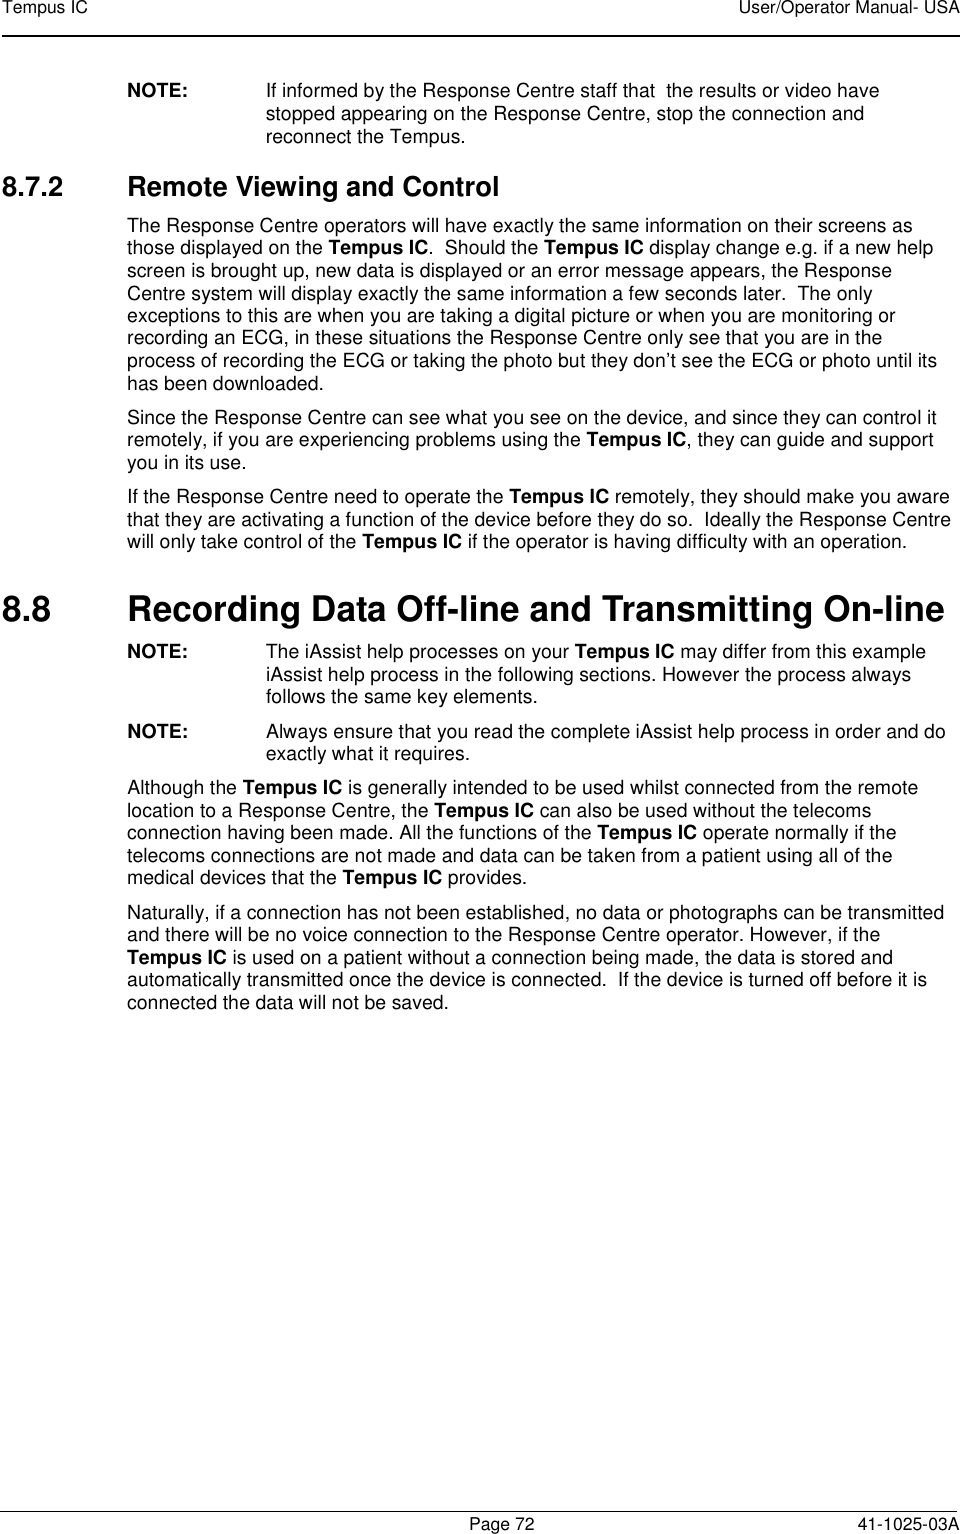 Tempus IC    User/Operator Manual- USA        Page 72   41-1025-03A NOTE:   If informed by the Response Centre staff that  the results or video have stopped appearing on the Response Centre, stop the connection and reconnect the Tempus.    8.7.2  Remote Viewing and Control The Response Centre operators will have exactly the same information on their screens as those displayed on the Tempus IC.  Should the Tempus IC display change e.g. if a new help screen is brought up, new data is displayed or an error message appears, the Response Centre system will display exactly the same information a few seconds later.  The only exceptions to this are when you are taking a digital picture or when you are monitoring or recording an ECG, in these situations the Response Centre only see that you are in the process of recording the ECG or taking the photo but they don’t see the ECG or photo until its has been downloaded.   Since the Response Centre can see what you see on the device, and since they can control it remotely, if you are experiencing problems using the Tempus IC, they can guide and support you in its use.   If the Response Centre need to operate the Tempus IC remotely, they should make you aware that they are activating a function of the device before they do so.  Ideally the Response Centre will only take control of the Tempus IC if the operator is having difficulty with an operation. 8.8  Recording Data Off-line and Transmitting On-line NOTE:  The iAssist help processes on your Tempus IC may differ from this example iAssist help process in the following sections. However the process always follows the same key elements.   NOTE:  Always ensure that you read the complete iAssist help process in order and do exactly what it requires.  Although the Tempus IC is generally intended to be used whilst connected from the remote location to a Response Centre, the Tempus IC can also be used without the telecoms connection having been made. All the functions of the Tempus IC operate normally if the telecoms connections are not made and data can be taken from a patient using all of the medical devices that the Tempus IC provides. Naturally, if a connection has not been established, no data or photographs can be transmitted and there will be no voice connection to the Response Centre operator. However, if the Tempus IC is used on a patient without a connection being made, the data is stored and automatically transmitted once the device is connected.  If the device is turned off before it is connected the data will not be saved.  